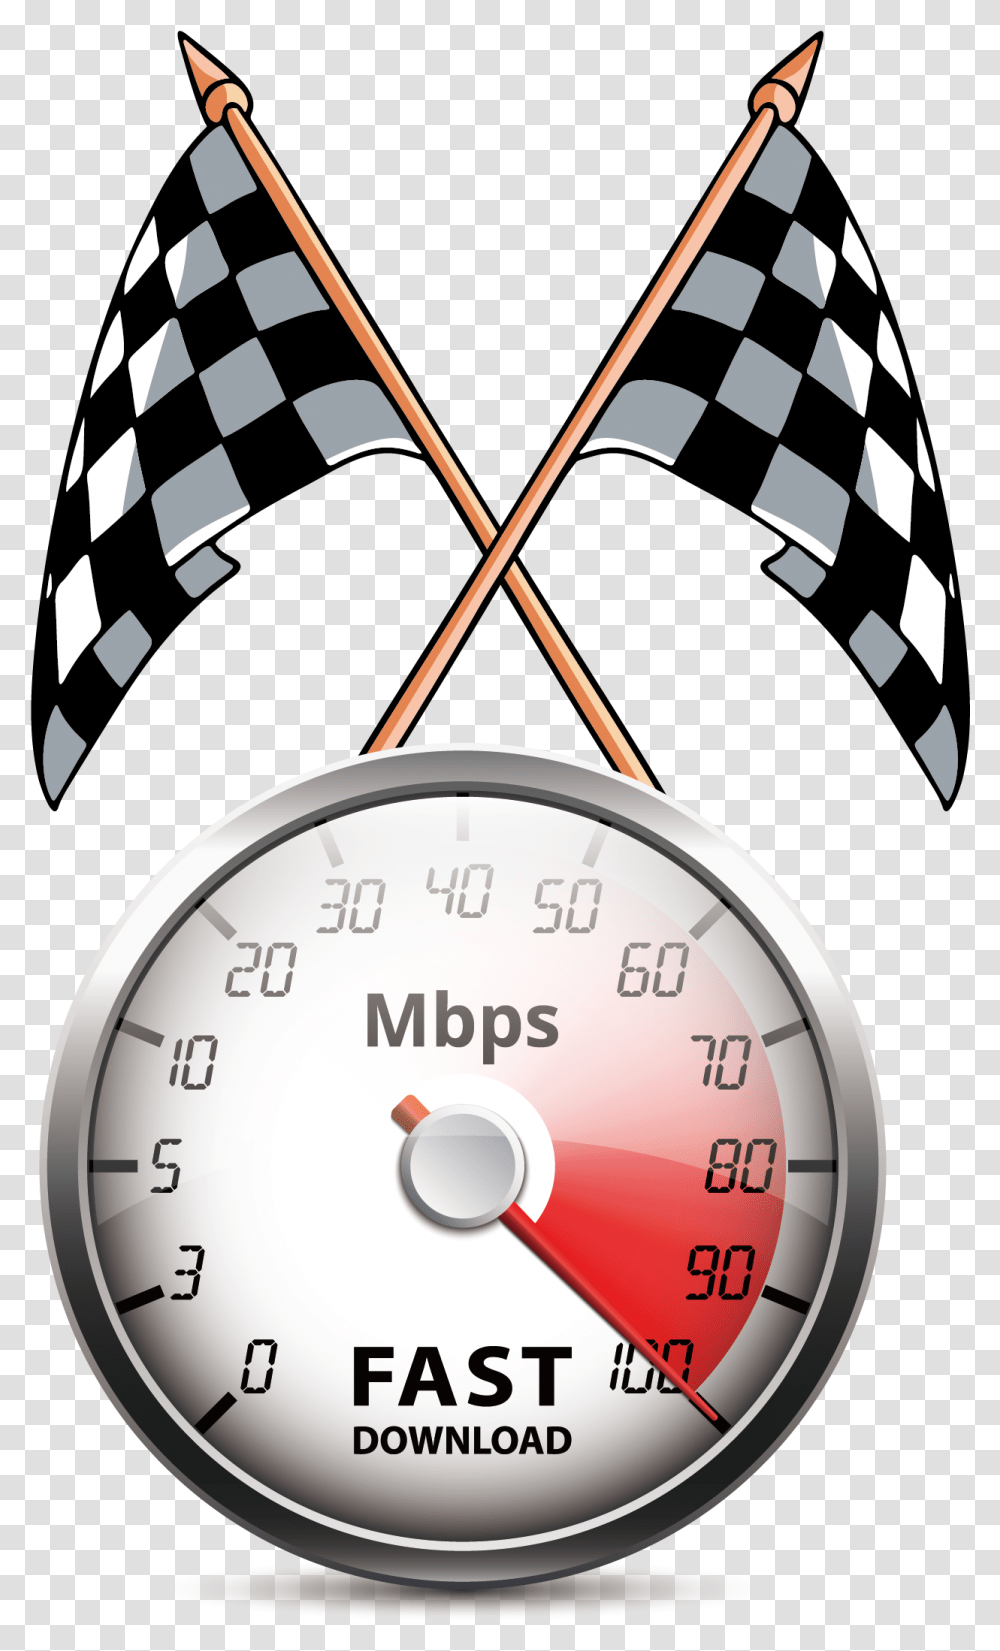 Download Speedometer Car Race Flags Image With No Race Car Speedometer, Clock Tower, Architecture, Building, Gauge Transparent Png